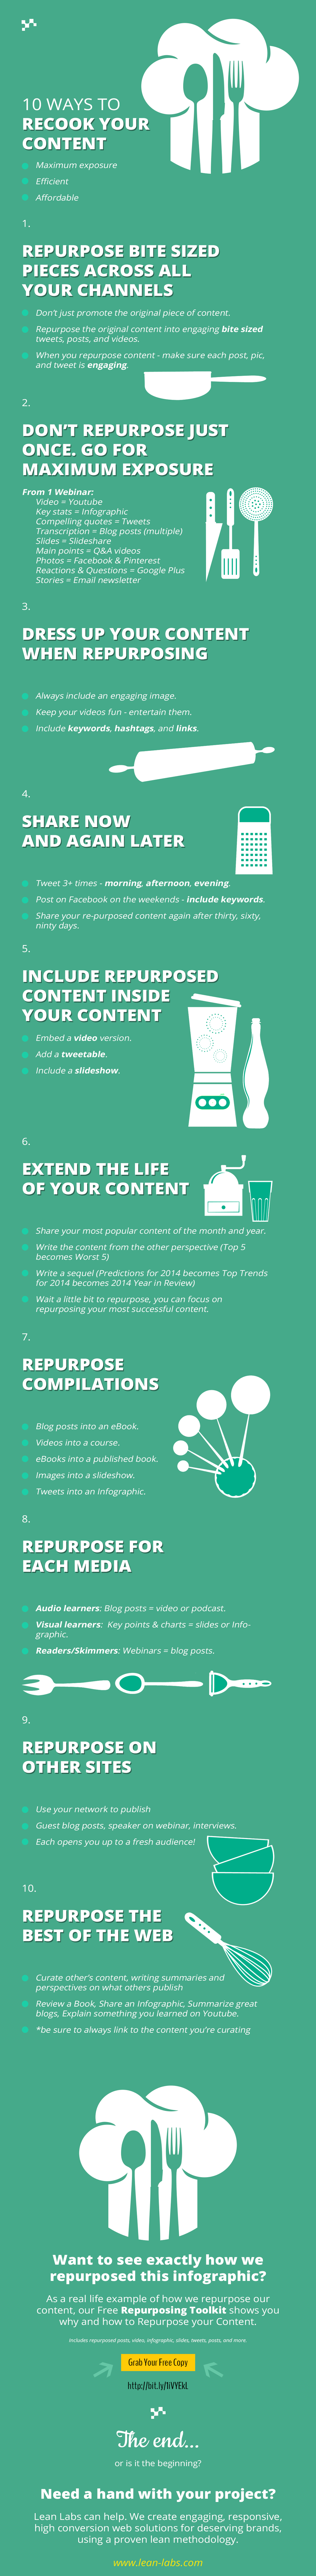 How to Repurpose Content Infographic